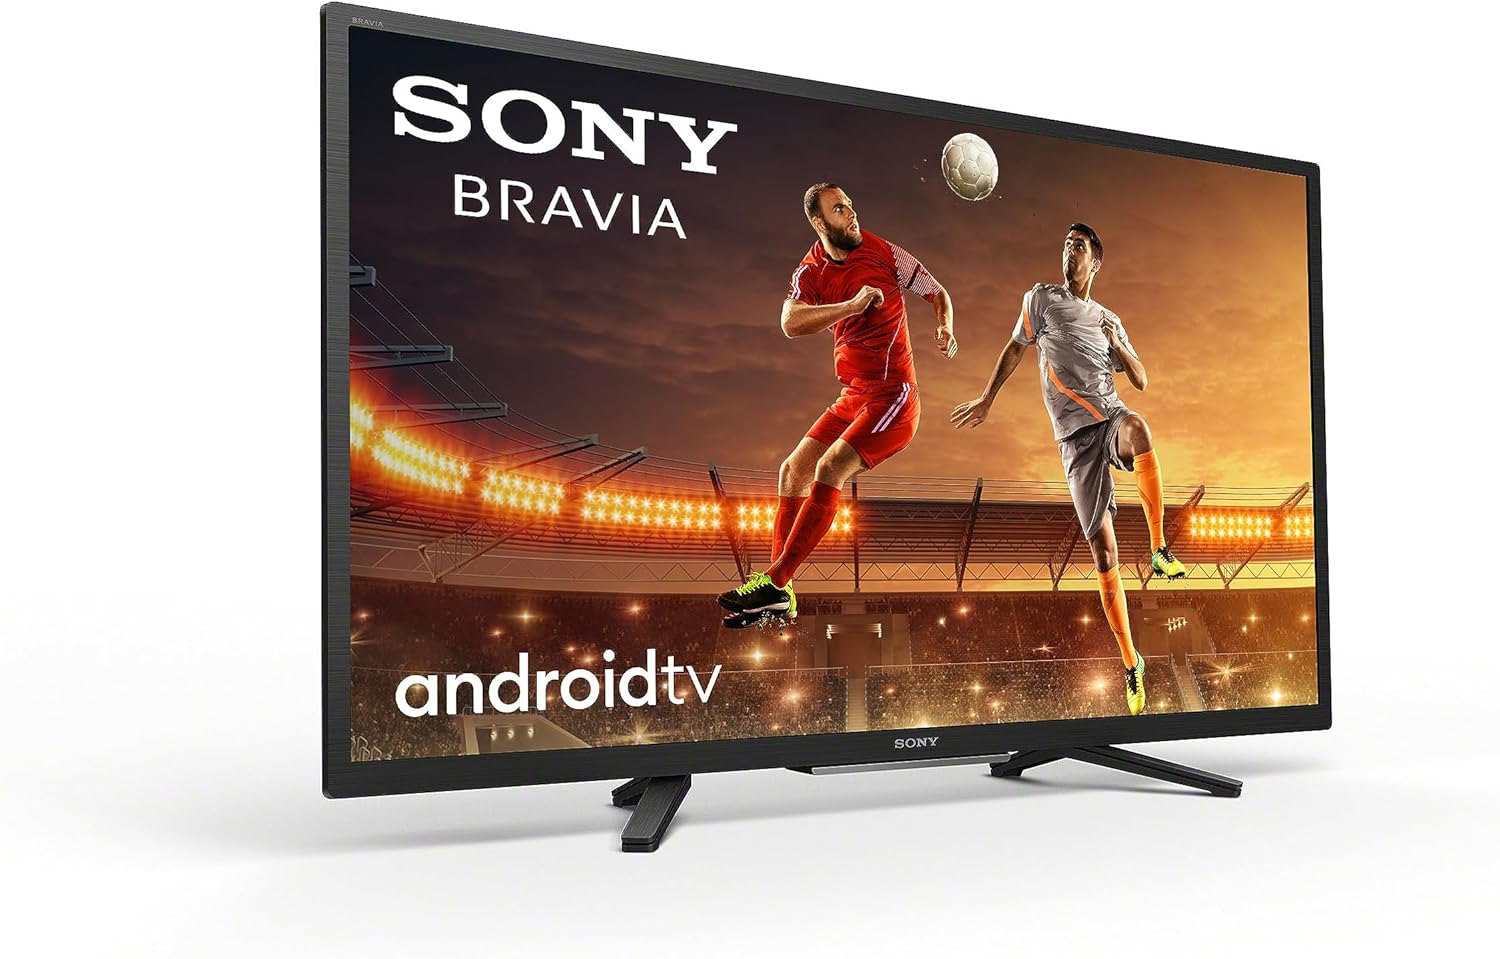 Sony BRAVIA, KD - 32W800, 32 Inch, LED, Smart TV, HD, Android TV, Narrow Bezel Design - Amazing Gadgets Outlet